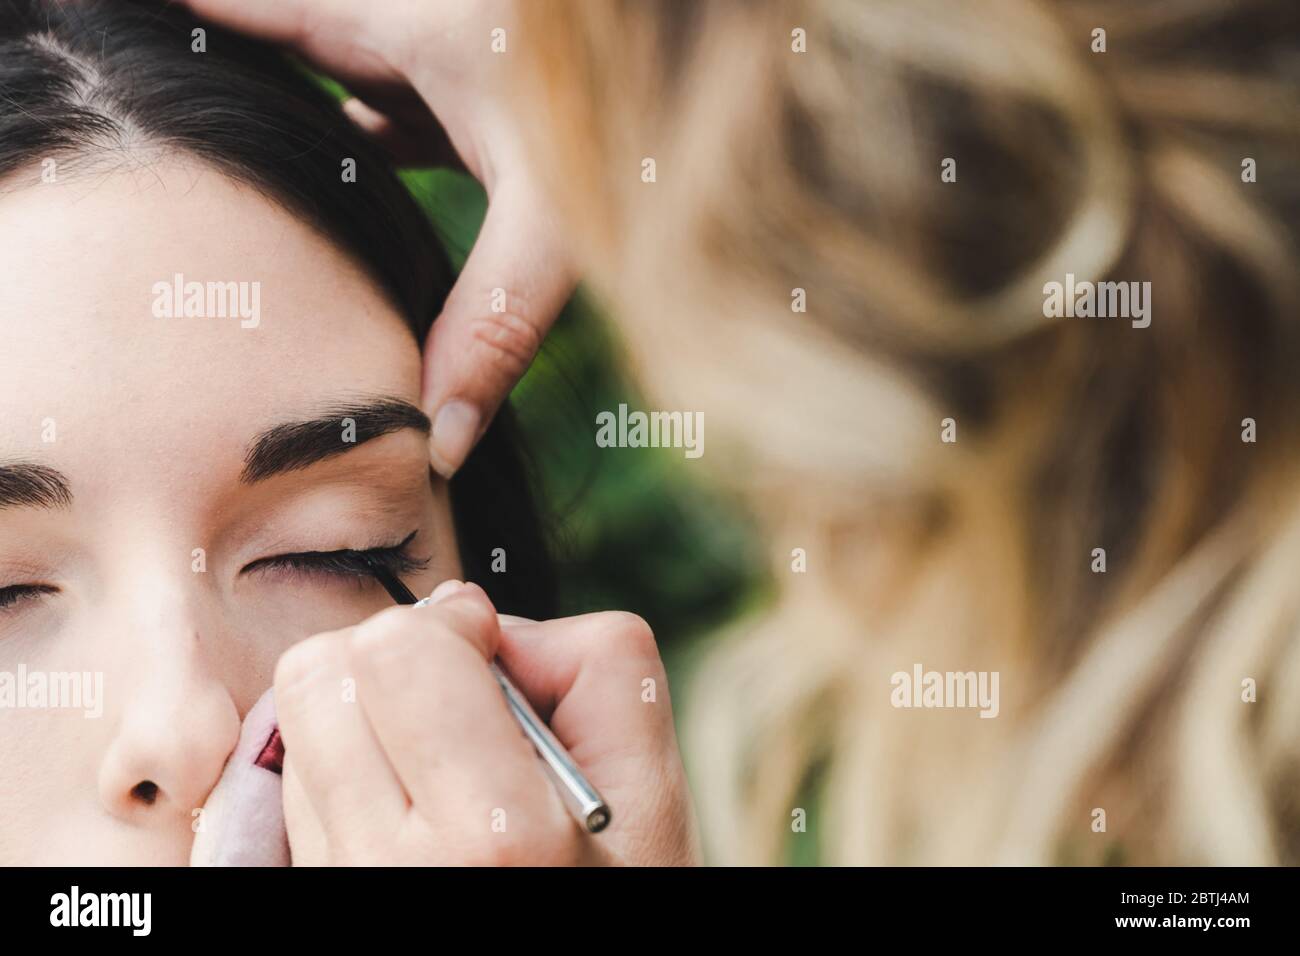 A makeup artist is drawing the eye line to a model. It is a close up image. Stock Photo